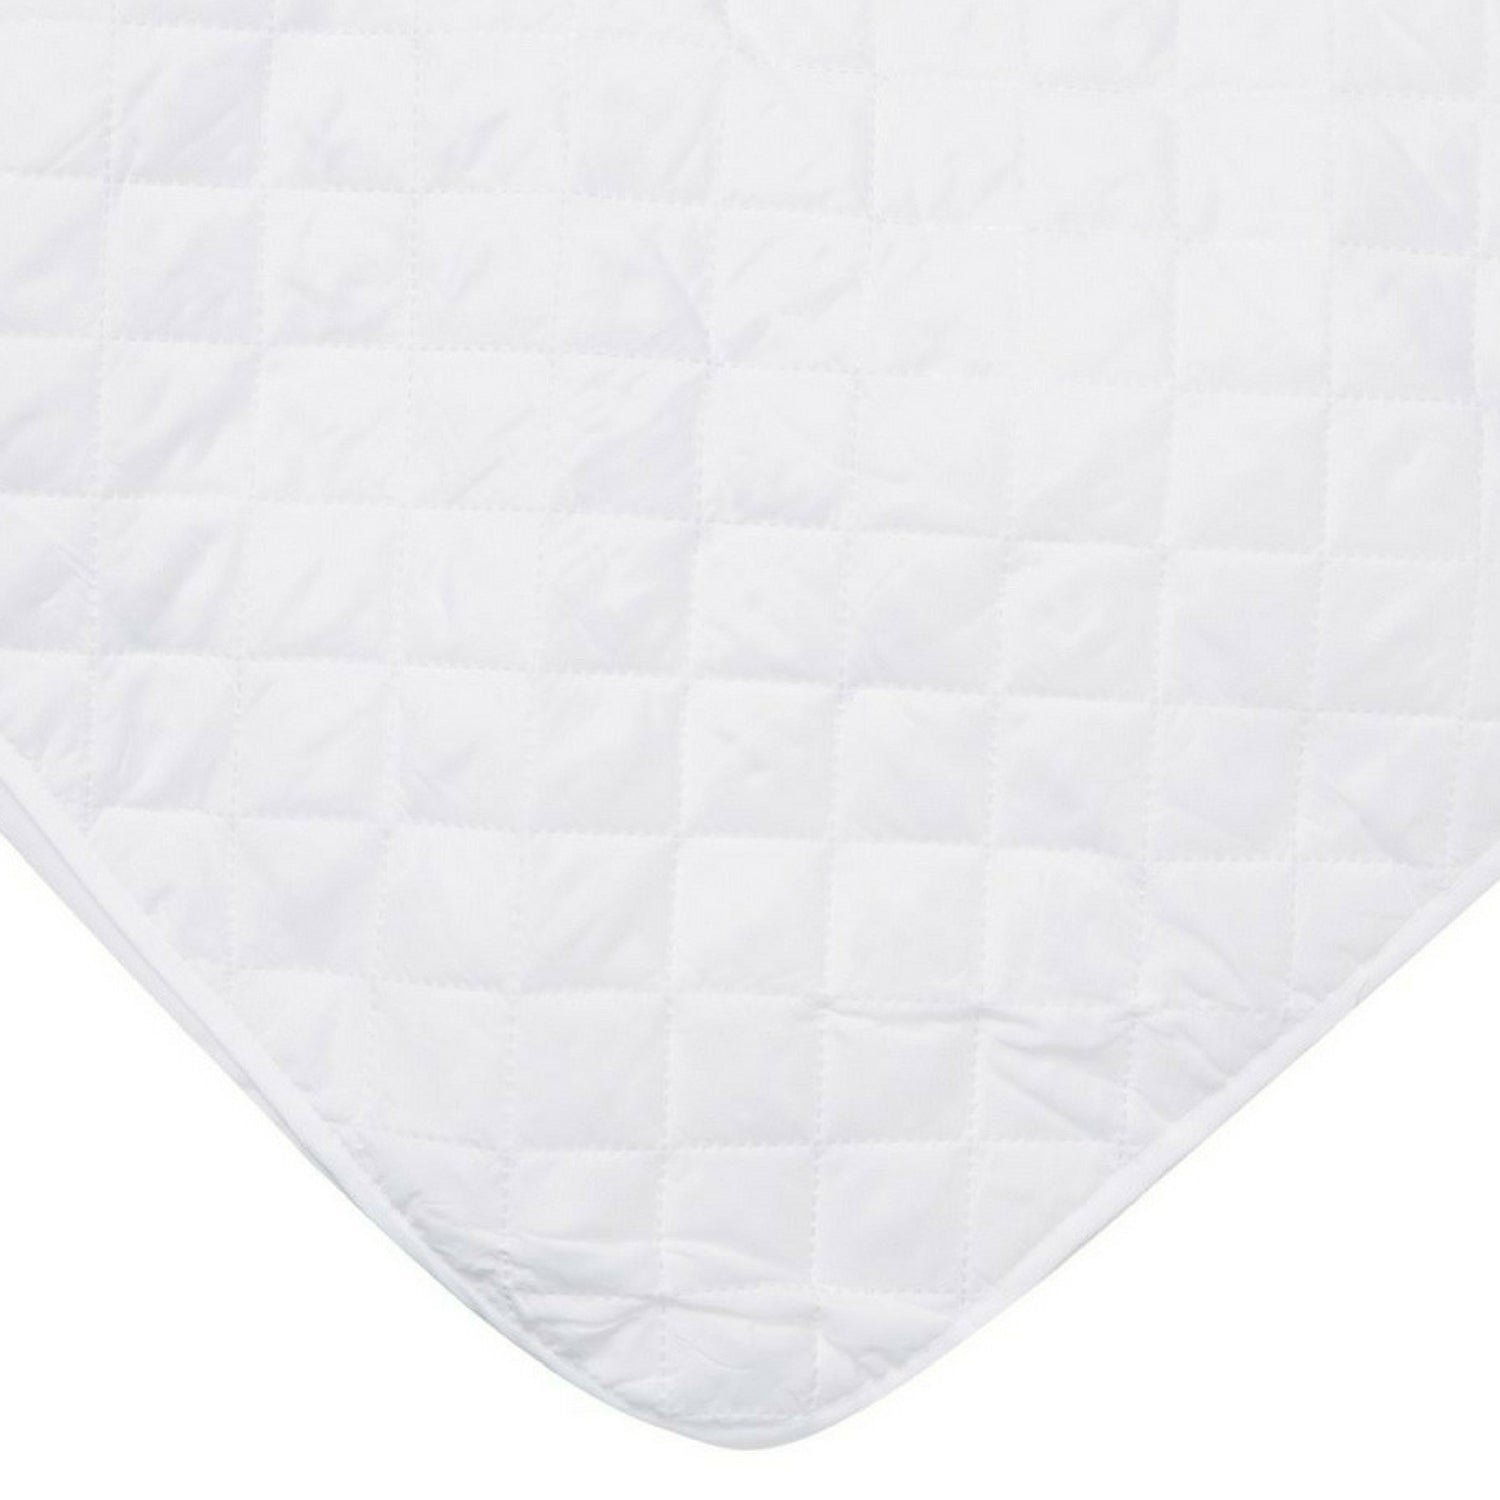 Classic Quilted Mattress Protector